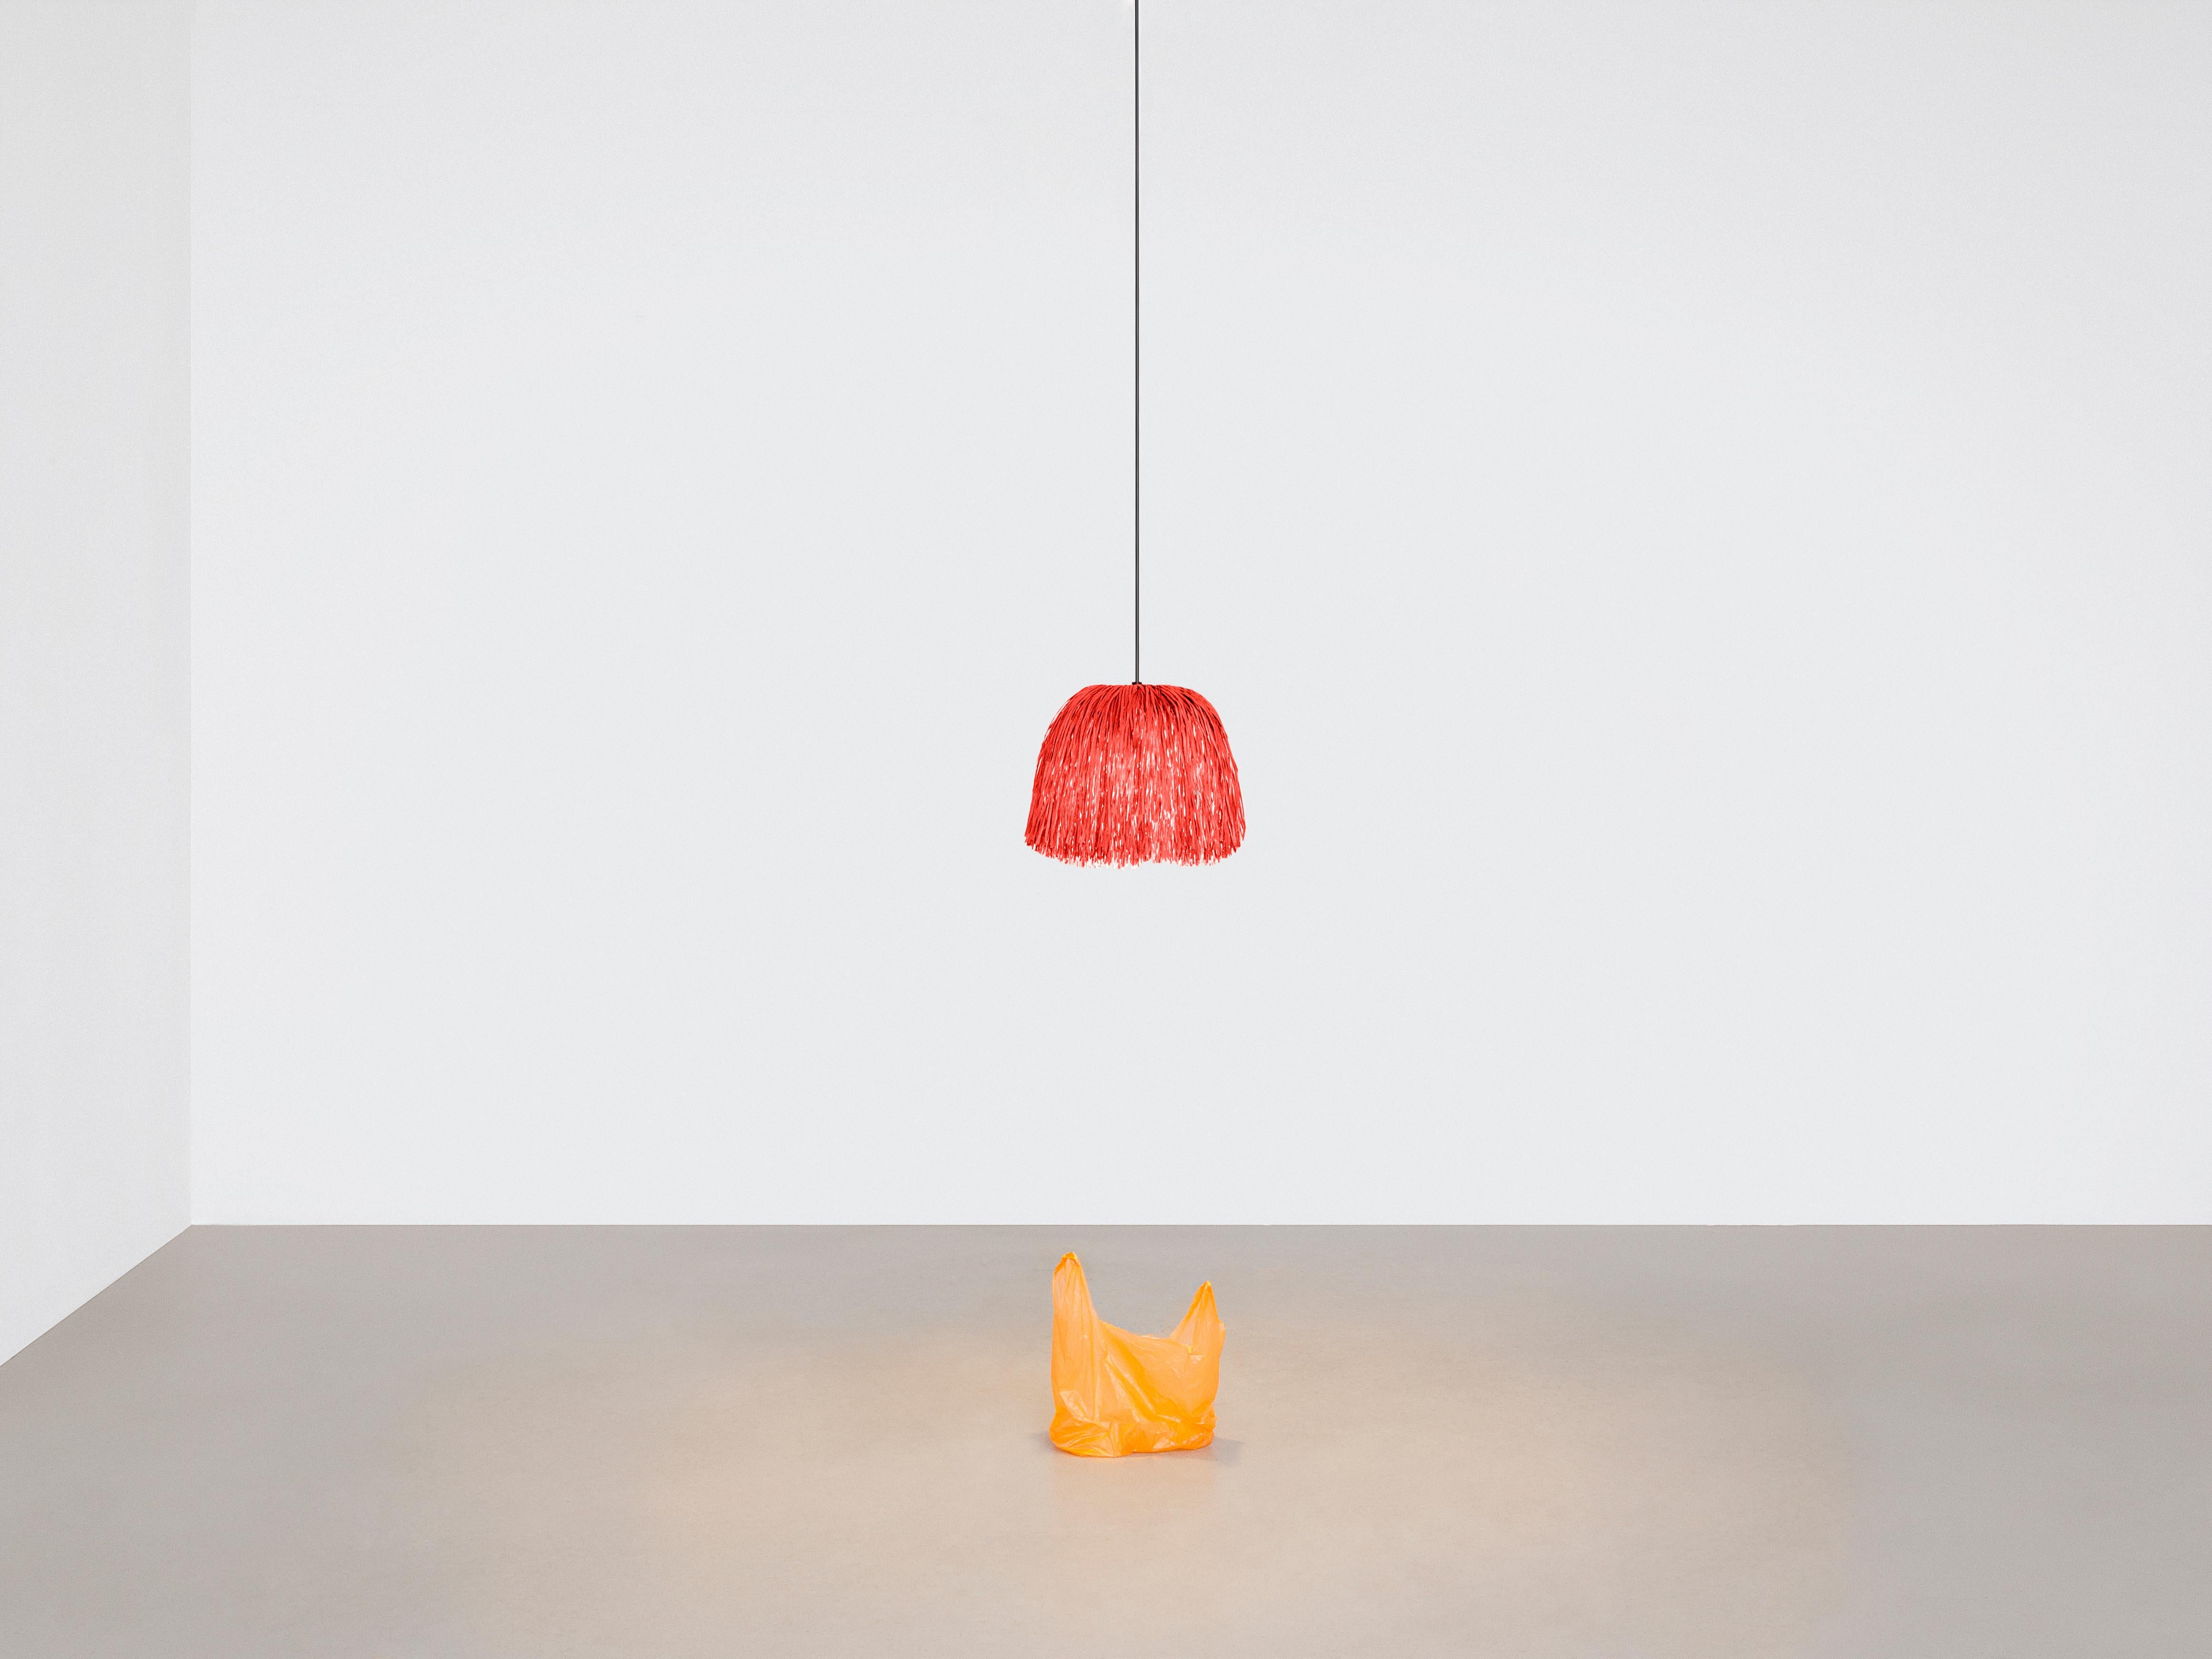 Red Fran XS Lamp by Llot Llov
Handcrafted light object
Dimensions: Ø 24 cm x H 30 cm
Materials: raffia fringes
Also available in green, red, black, beige 

With their bulky silhouette and rustling fringes, the FRAN lights are reminiscent of a